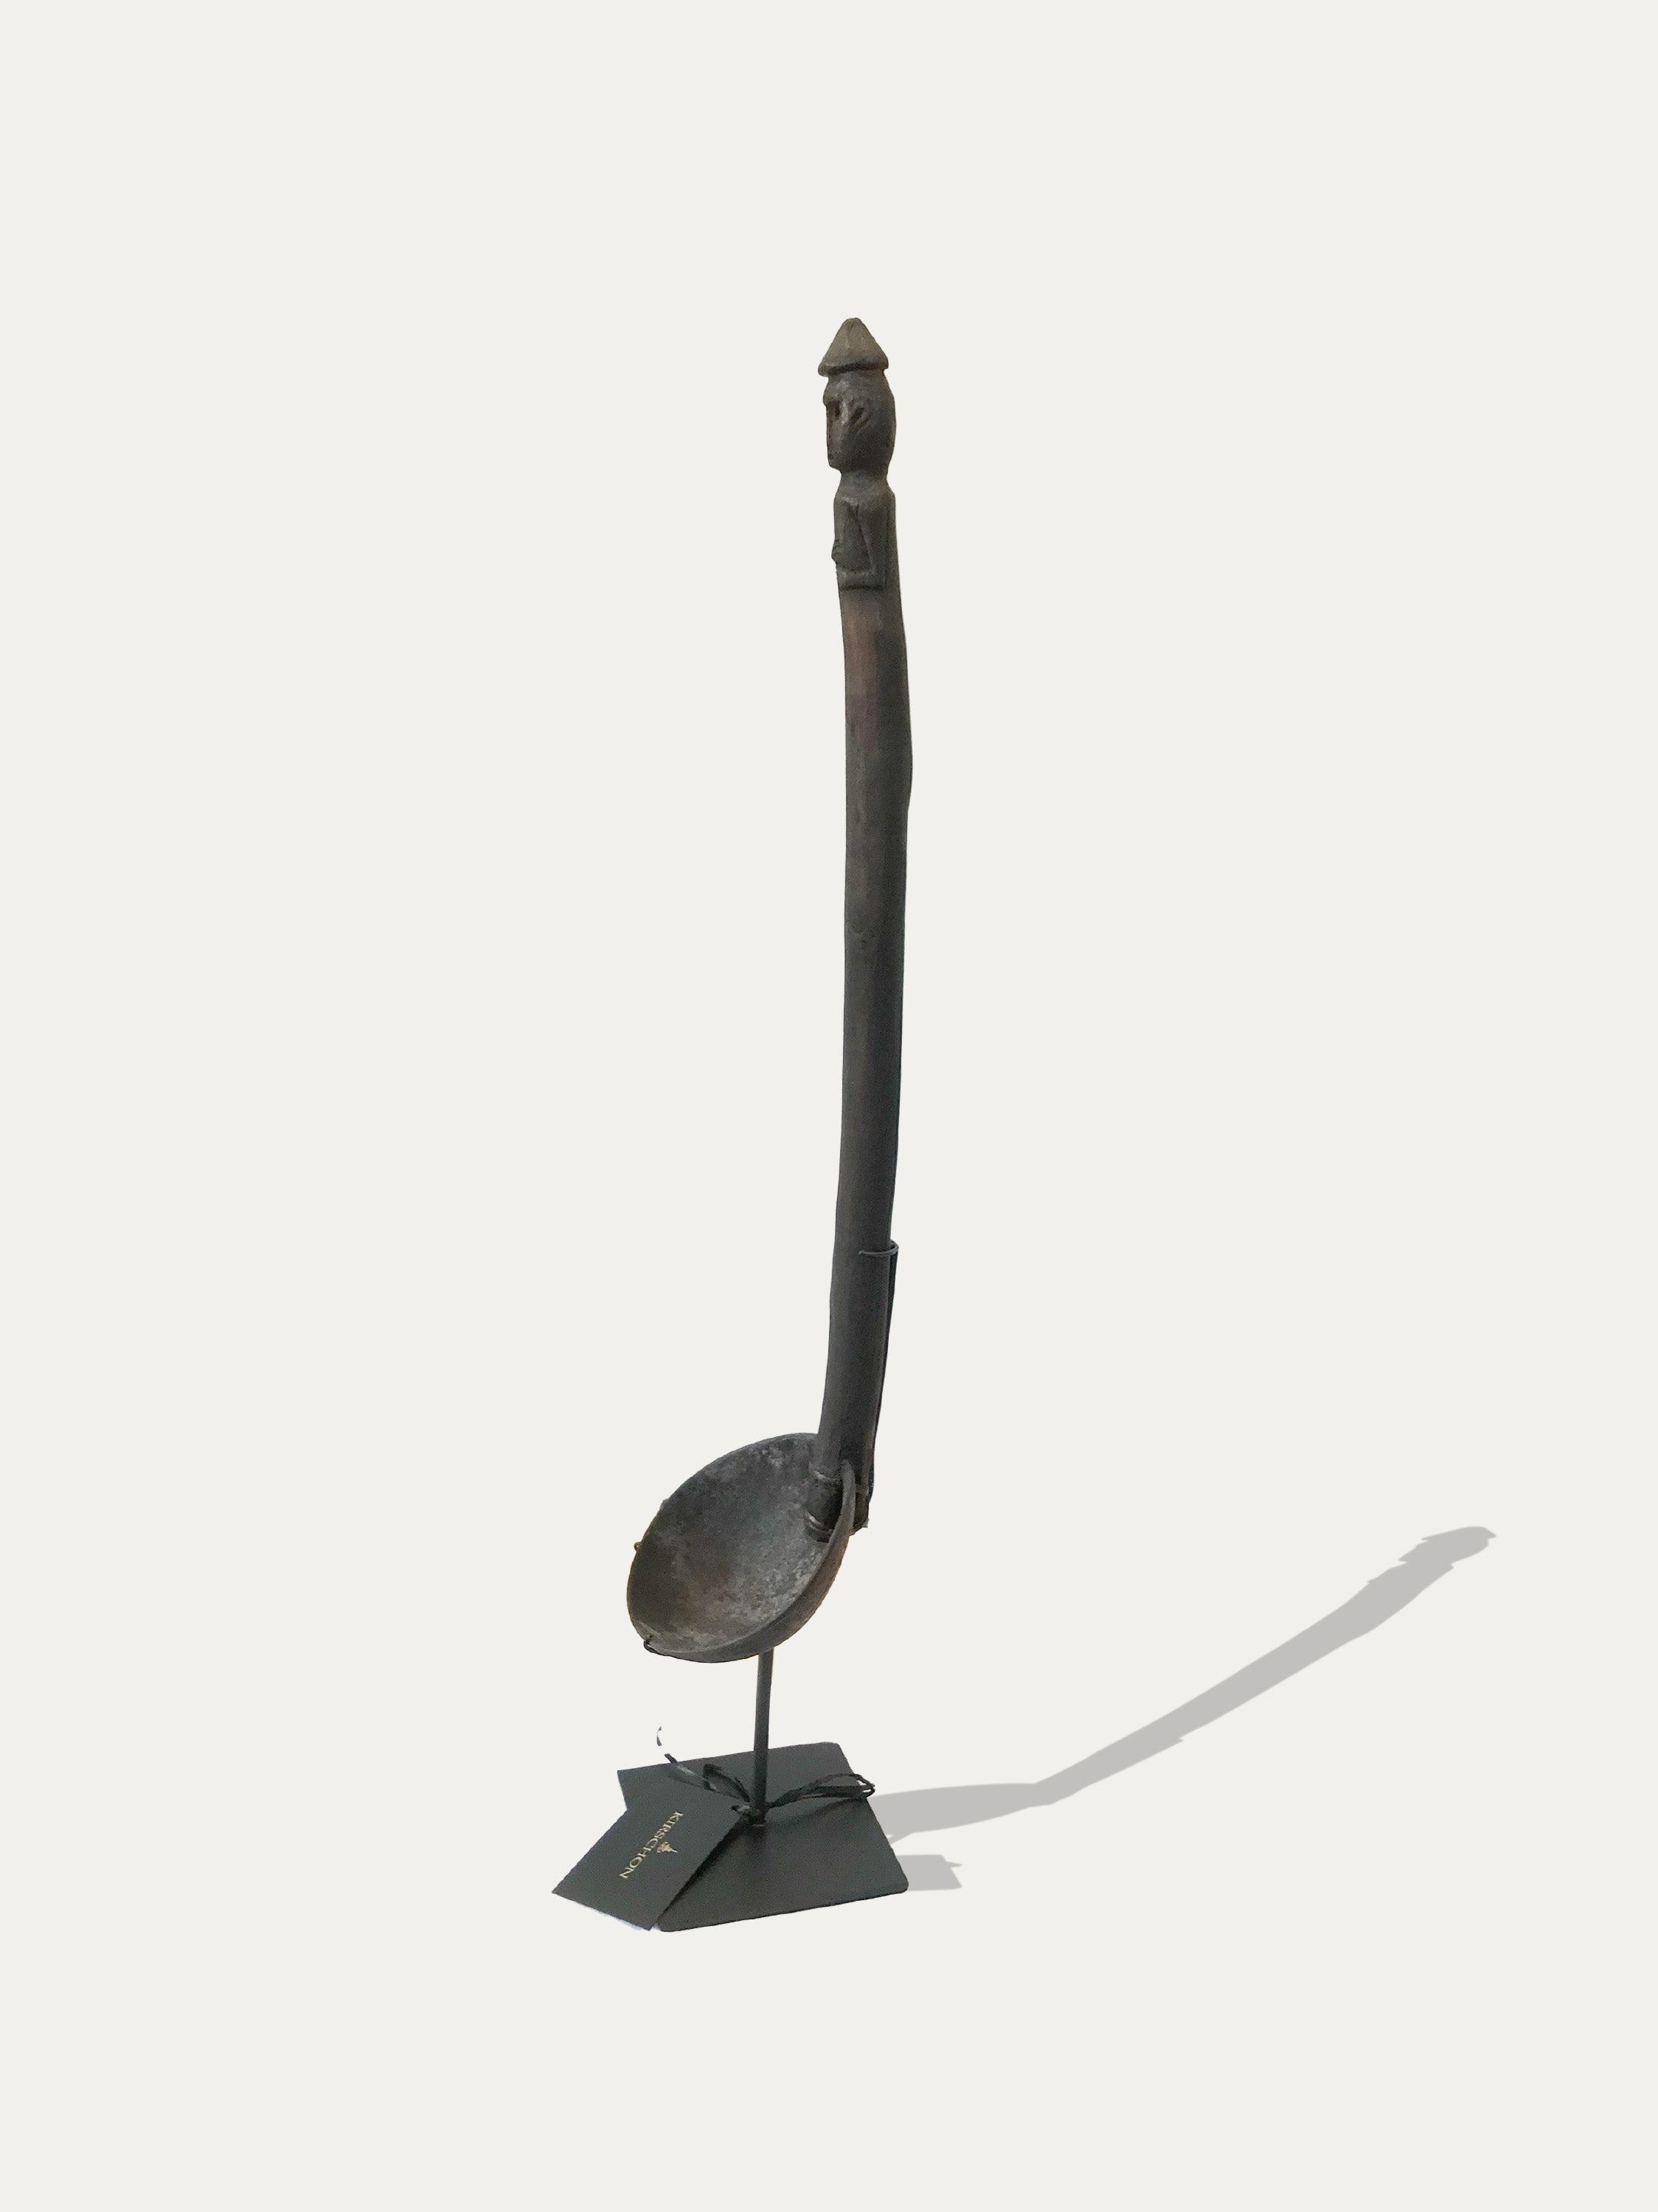 Ceremonial Ladle spoon from Sumba